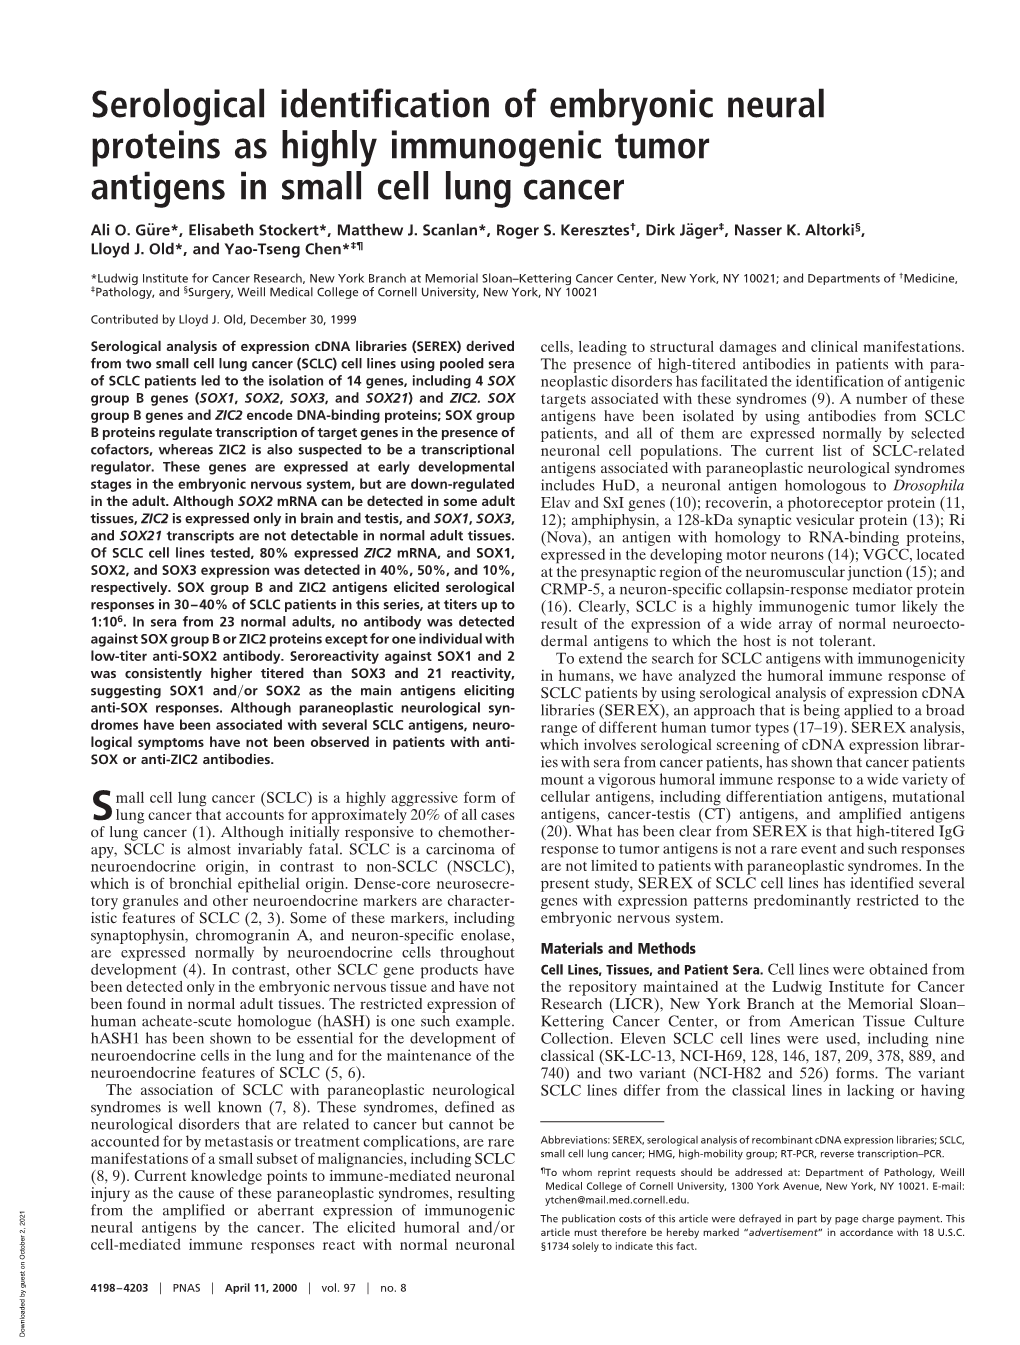 Serological Identification of Embryonic Neural Proteins As Highly Immunogenic Tumor Antigens in Small Cell Lung Cancer